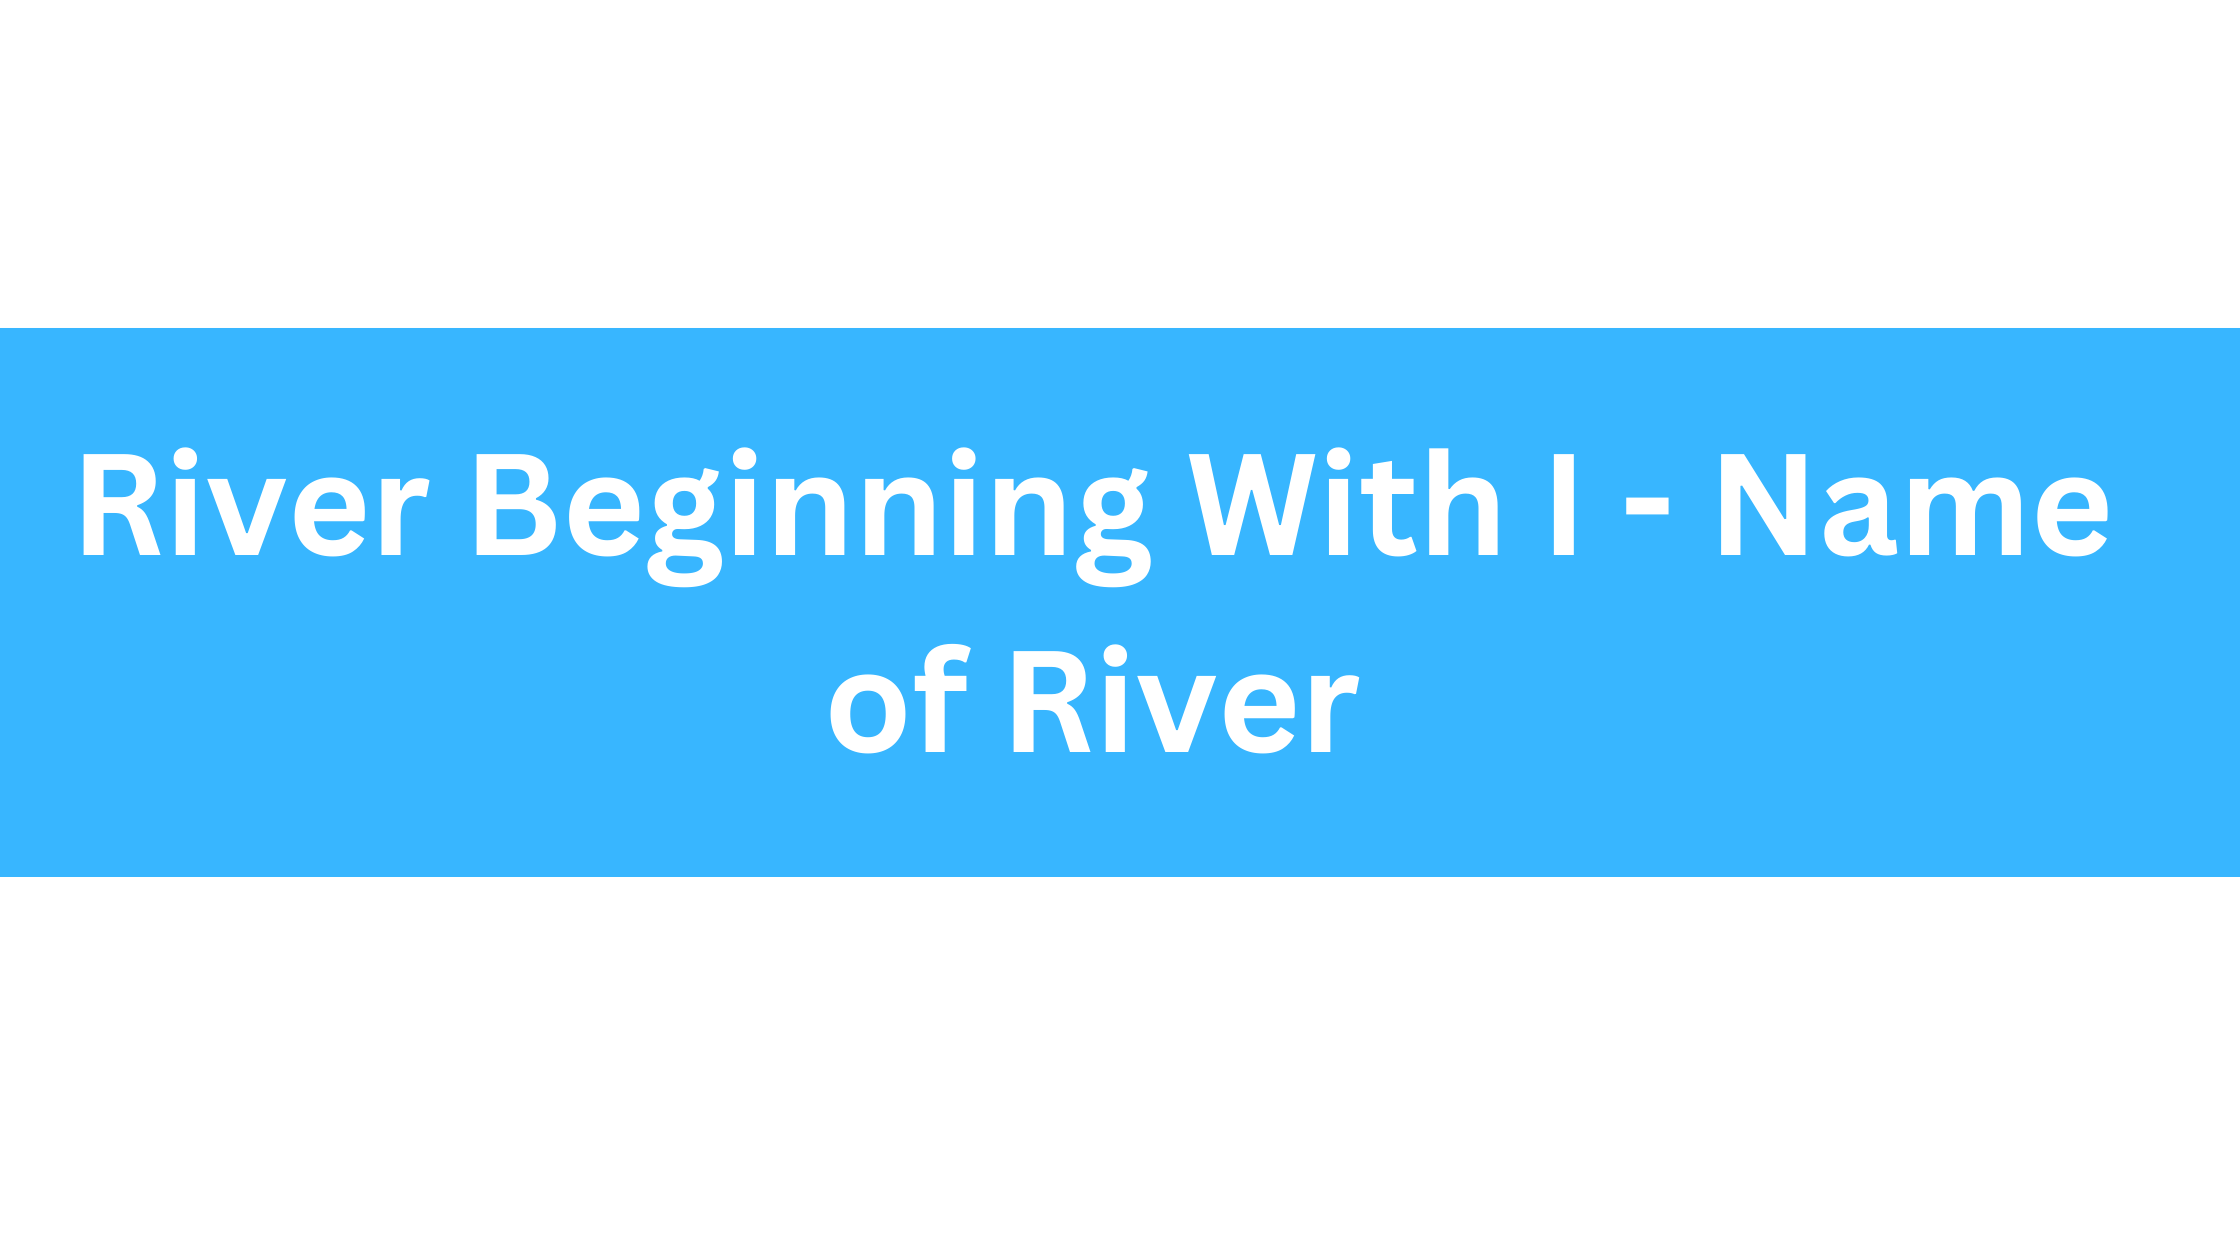 River Beginning With I